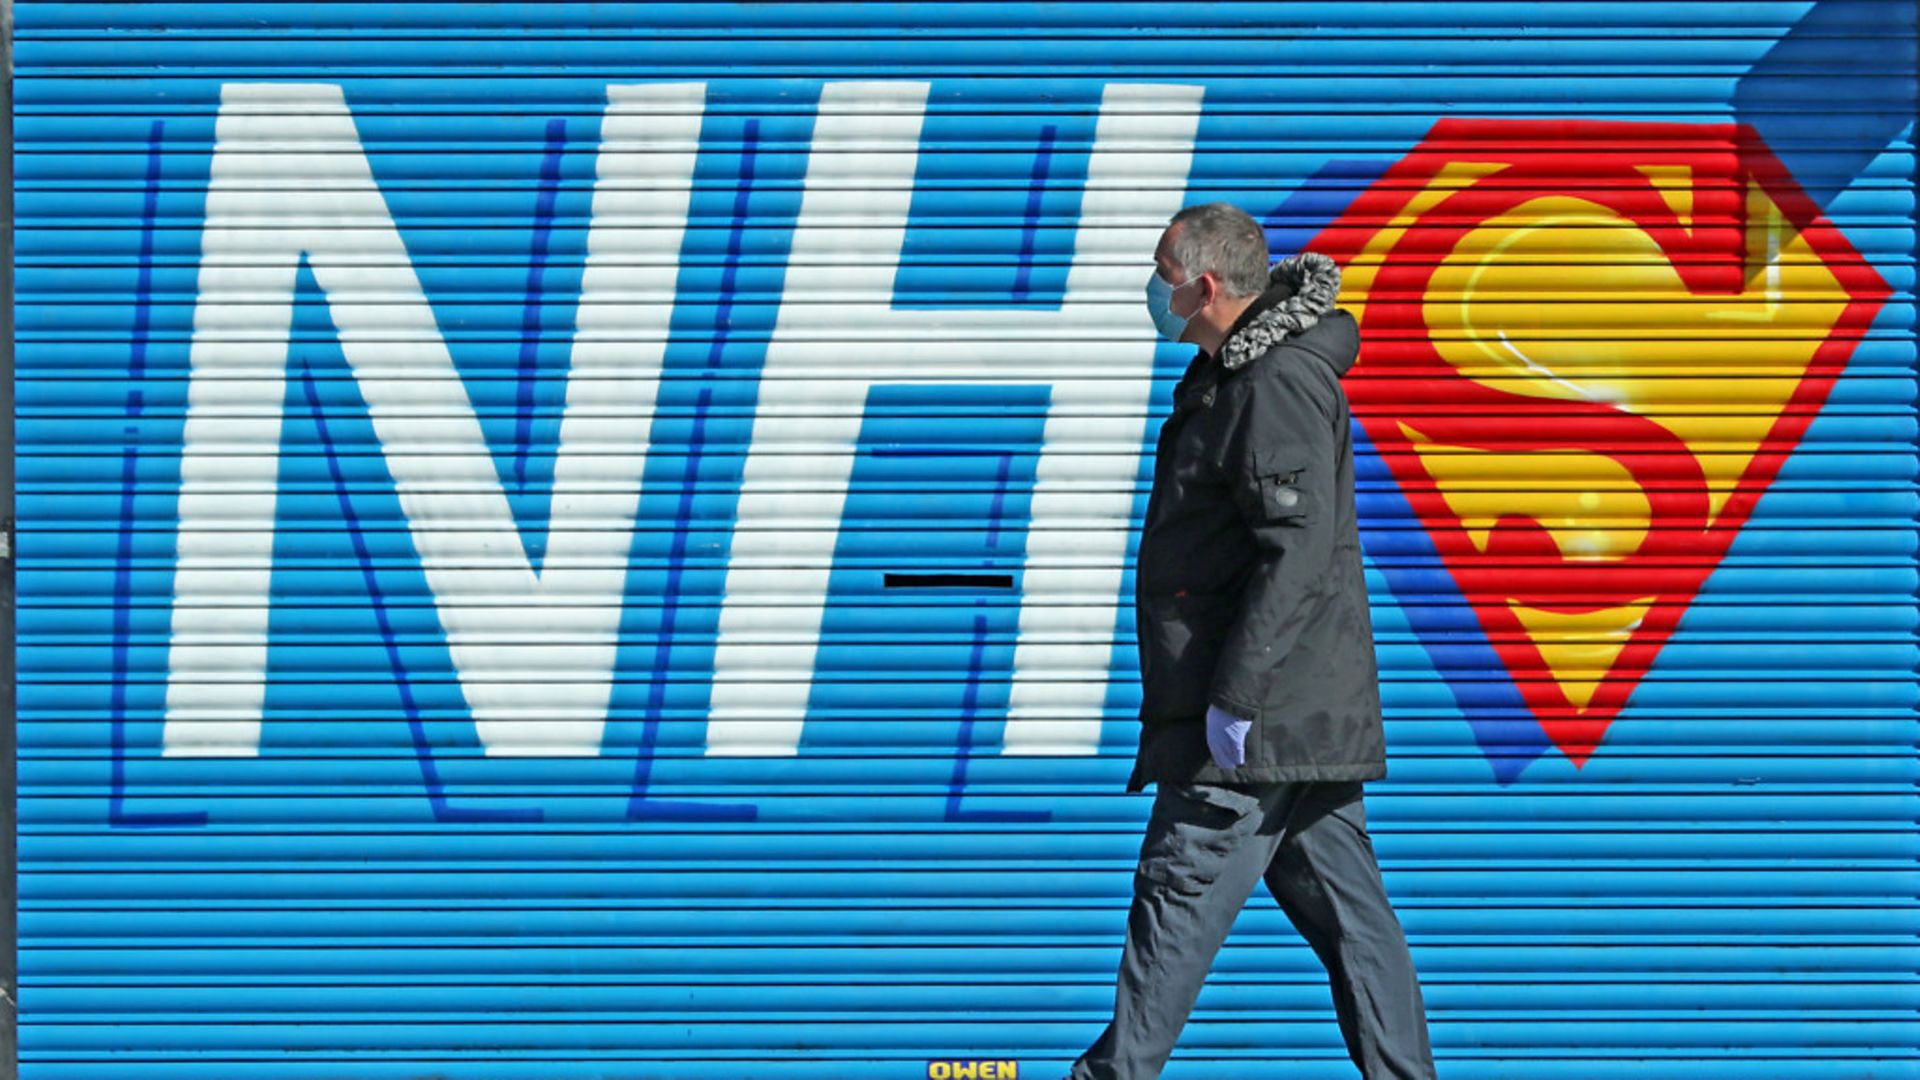 A man walks past a sign created in support of the NHS during the pandemic - Credit: Peter Byrne/PA